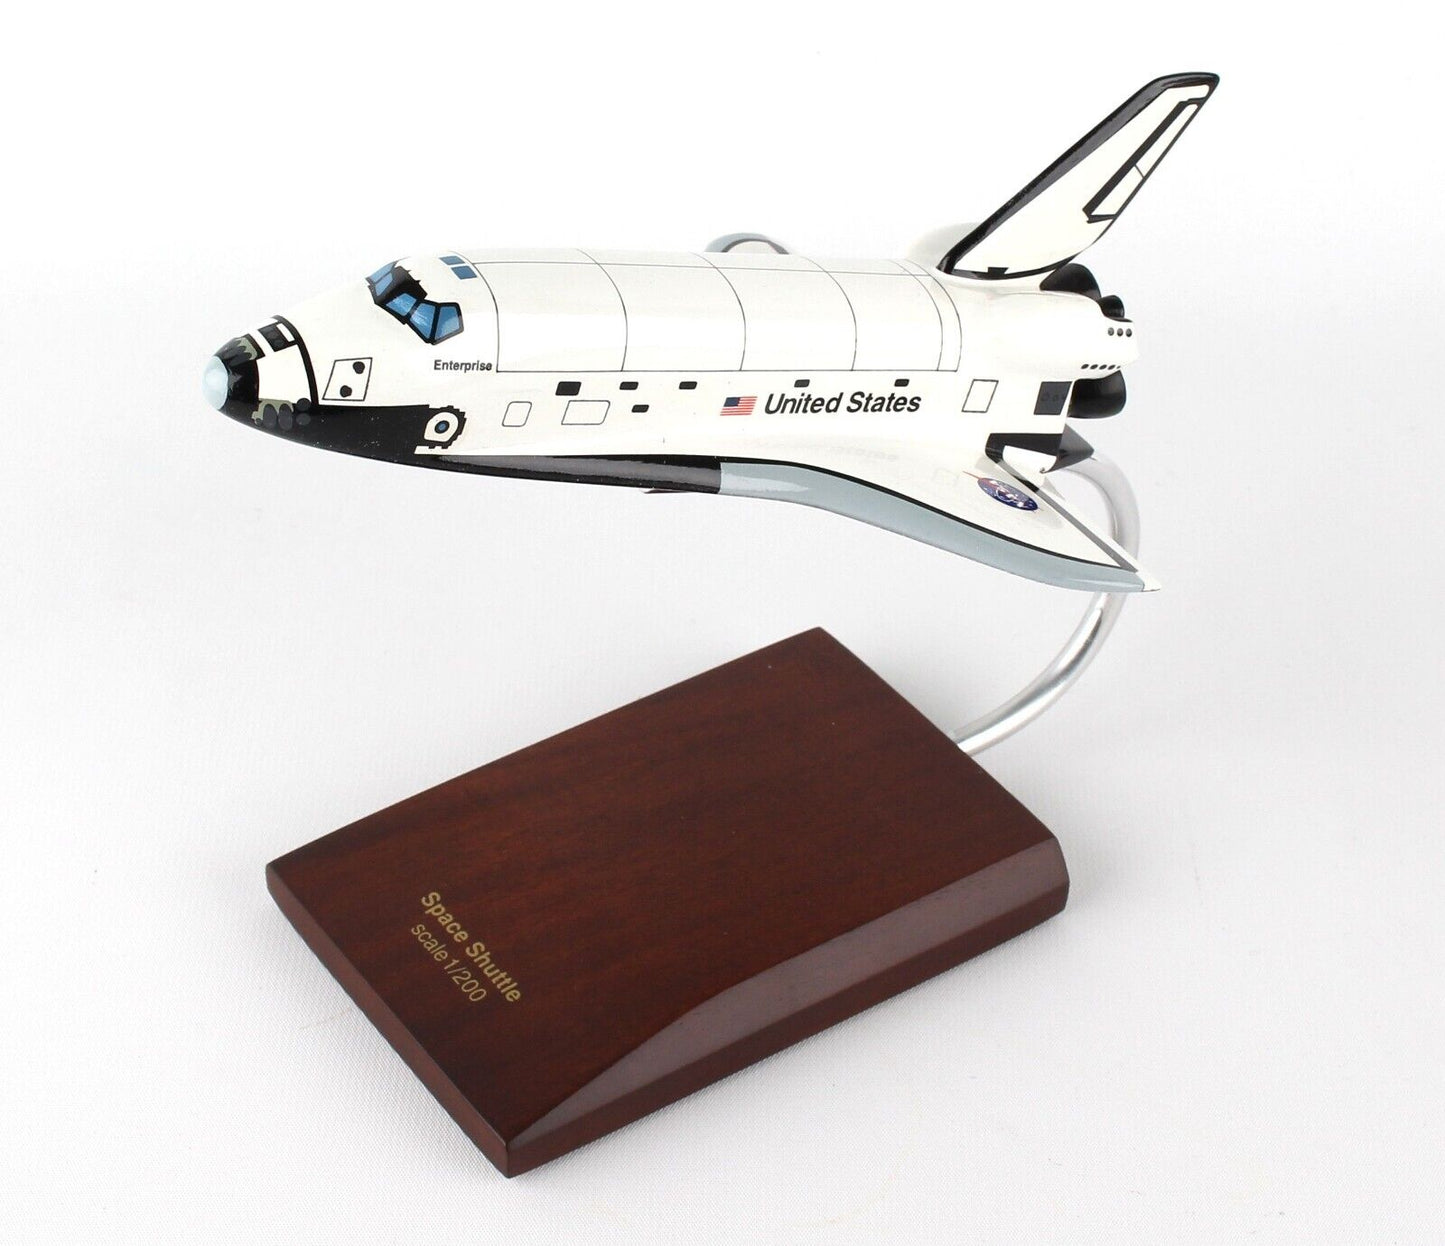 ALDO Hobbies & Creative Arts> Collectibles> Scale Model 7.25" in length & has a 4.50" wingspan. / NEW NASA Space Shuttle Enterprise Orbiter Wood Model Space Craft